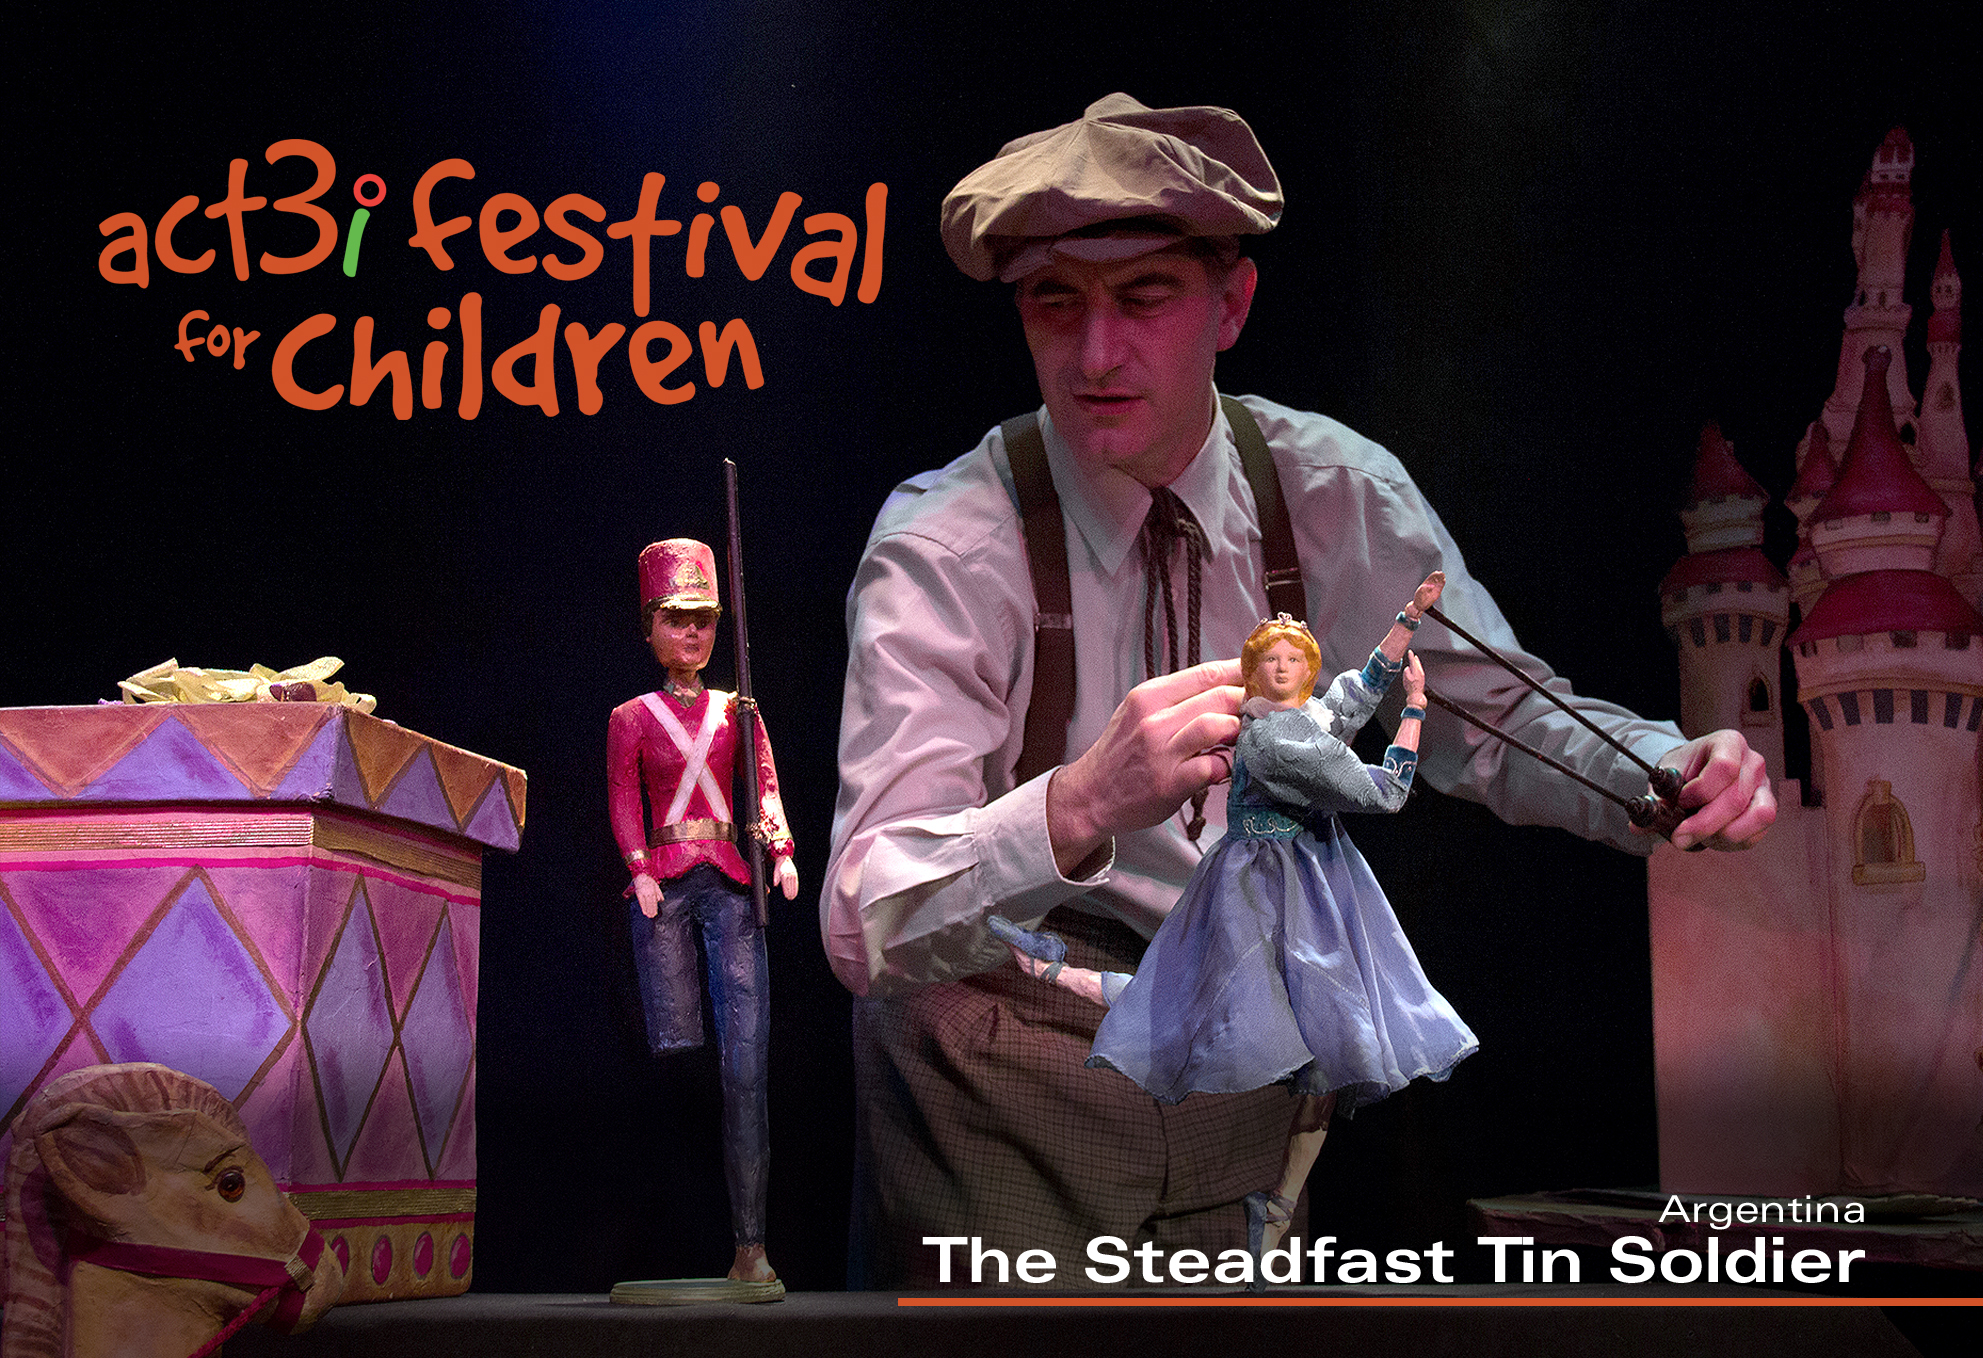 ACT 3i Festival for Children The Steadfast Tin Soldier (with logo)